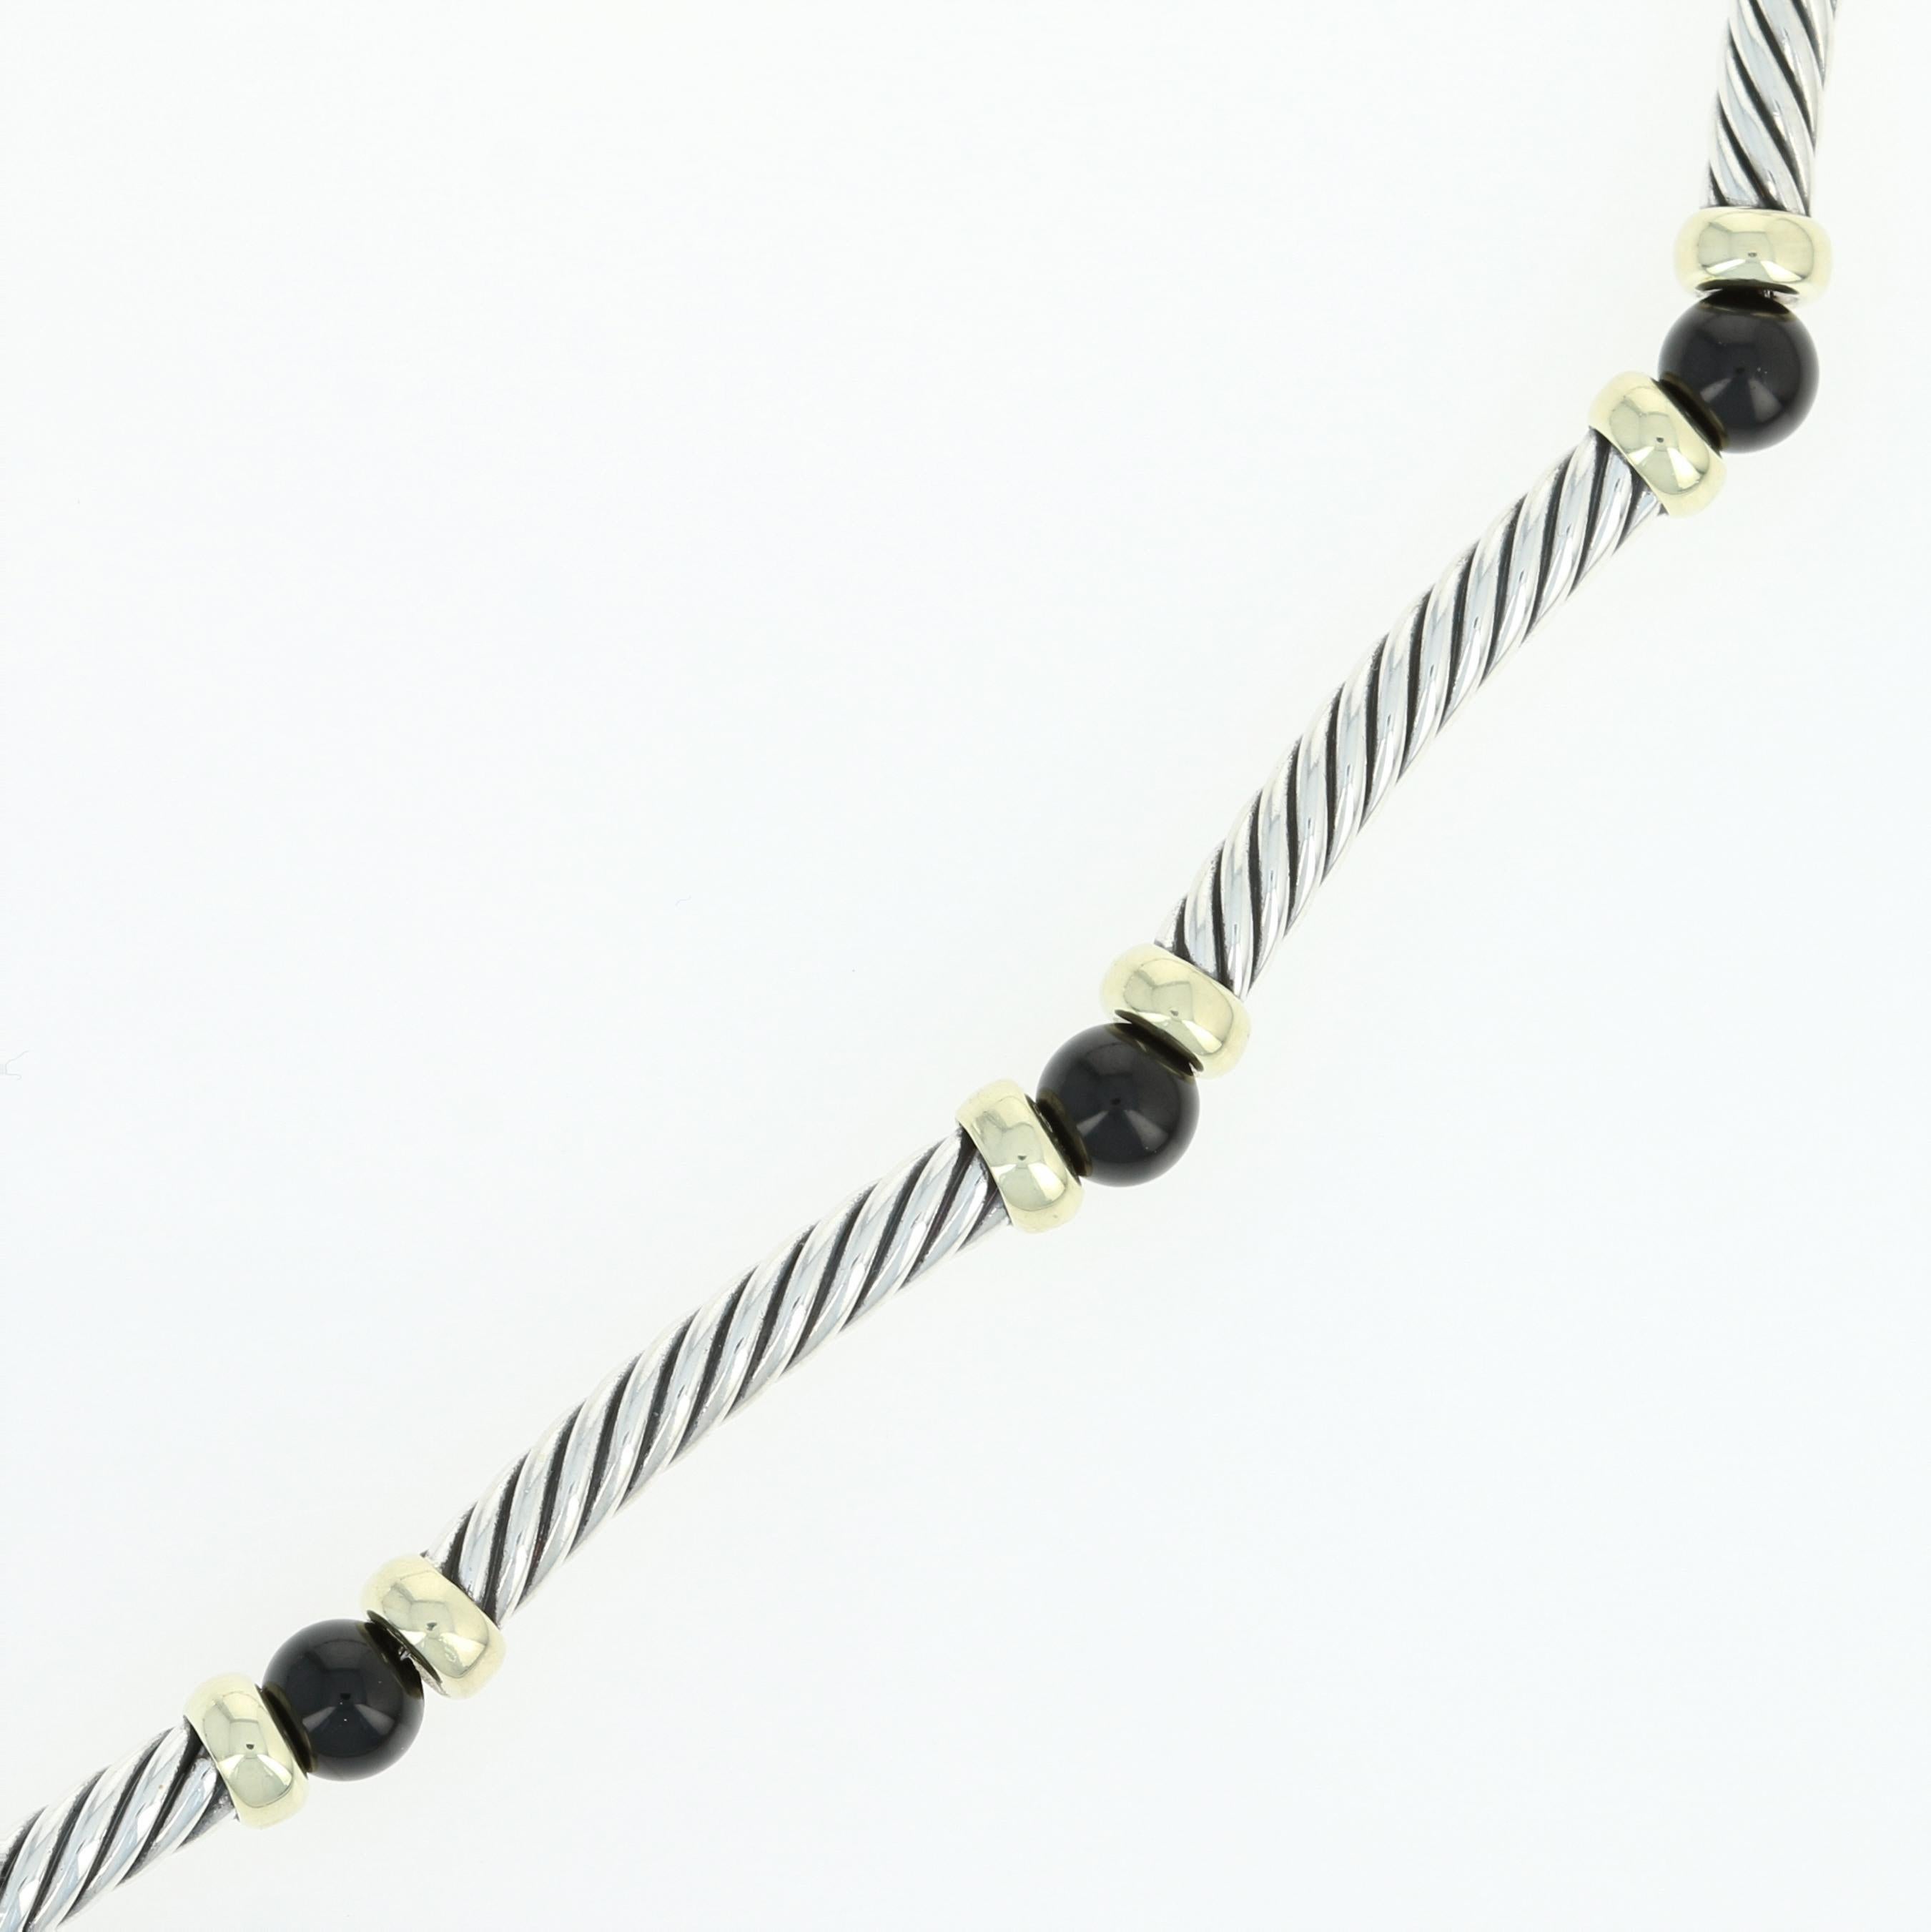 Step out in style with David Yurman! This sophisticated Hampton necklace showcases cable-textured sterling silver tubes that are slightly curved and capped in 14k yellow gold which are beautifully strung with jet black onyx beads along a durable